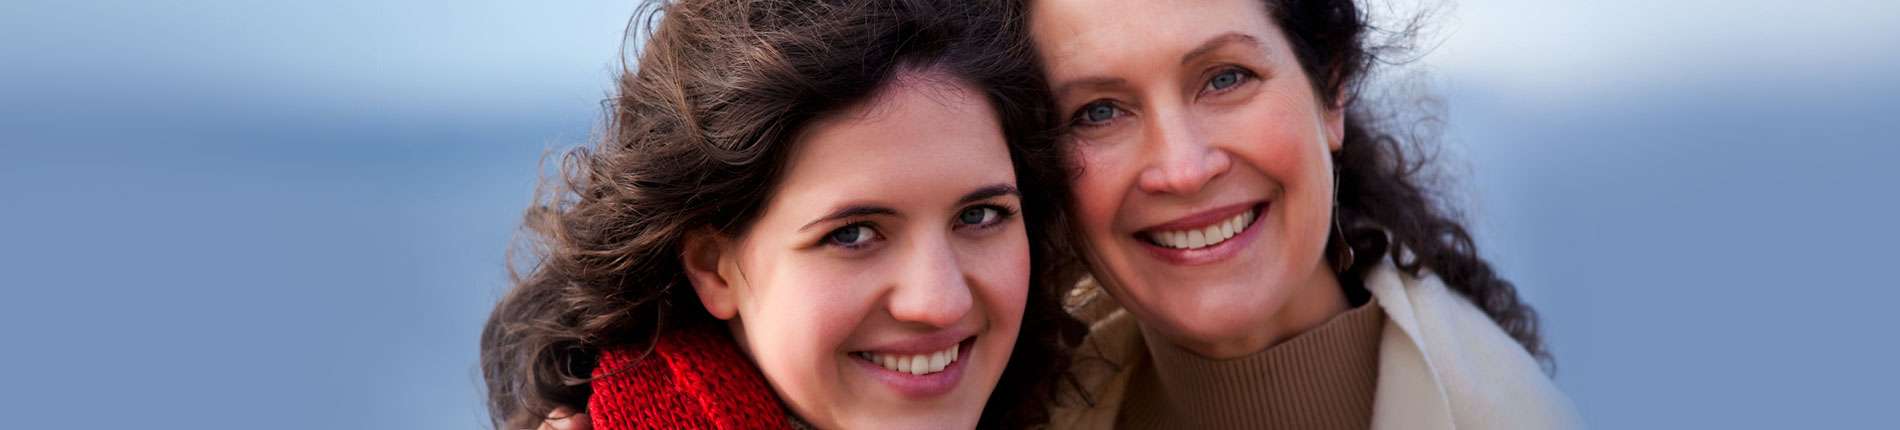 Stock image of two women smiling and holding each other